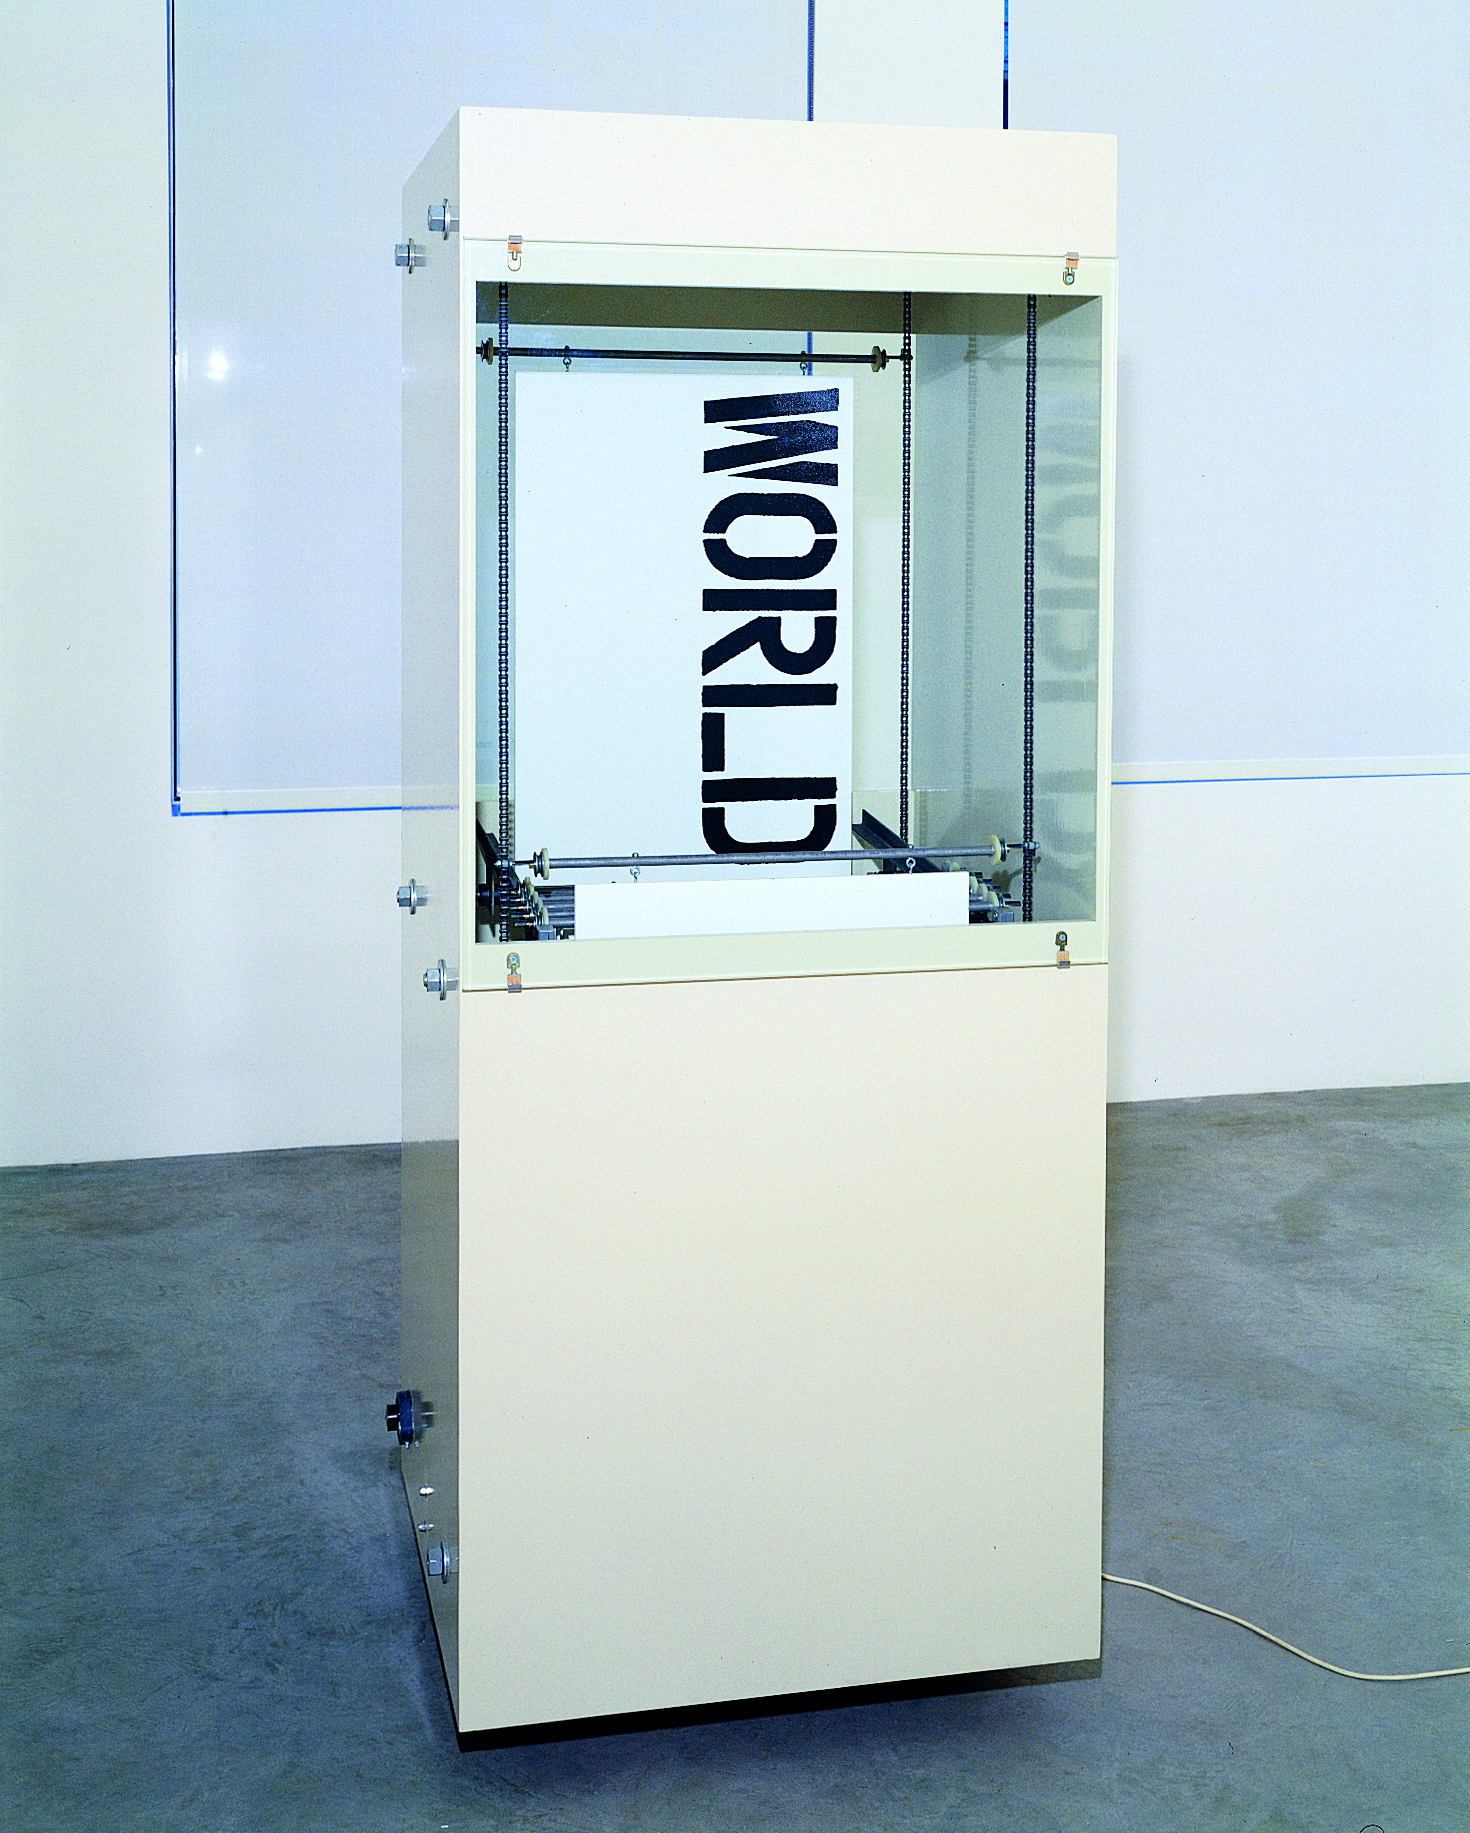 Word Box (with Christopher Wool and Paul Auster), 1991